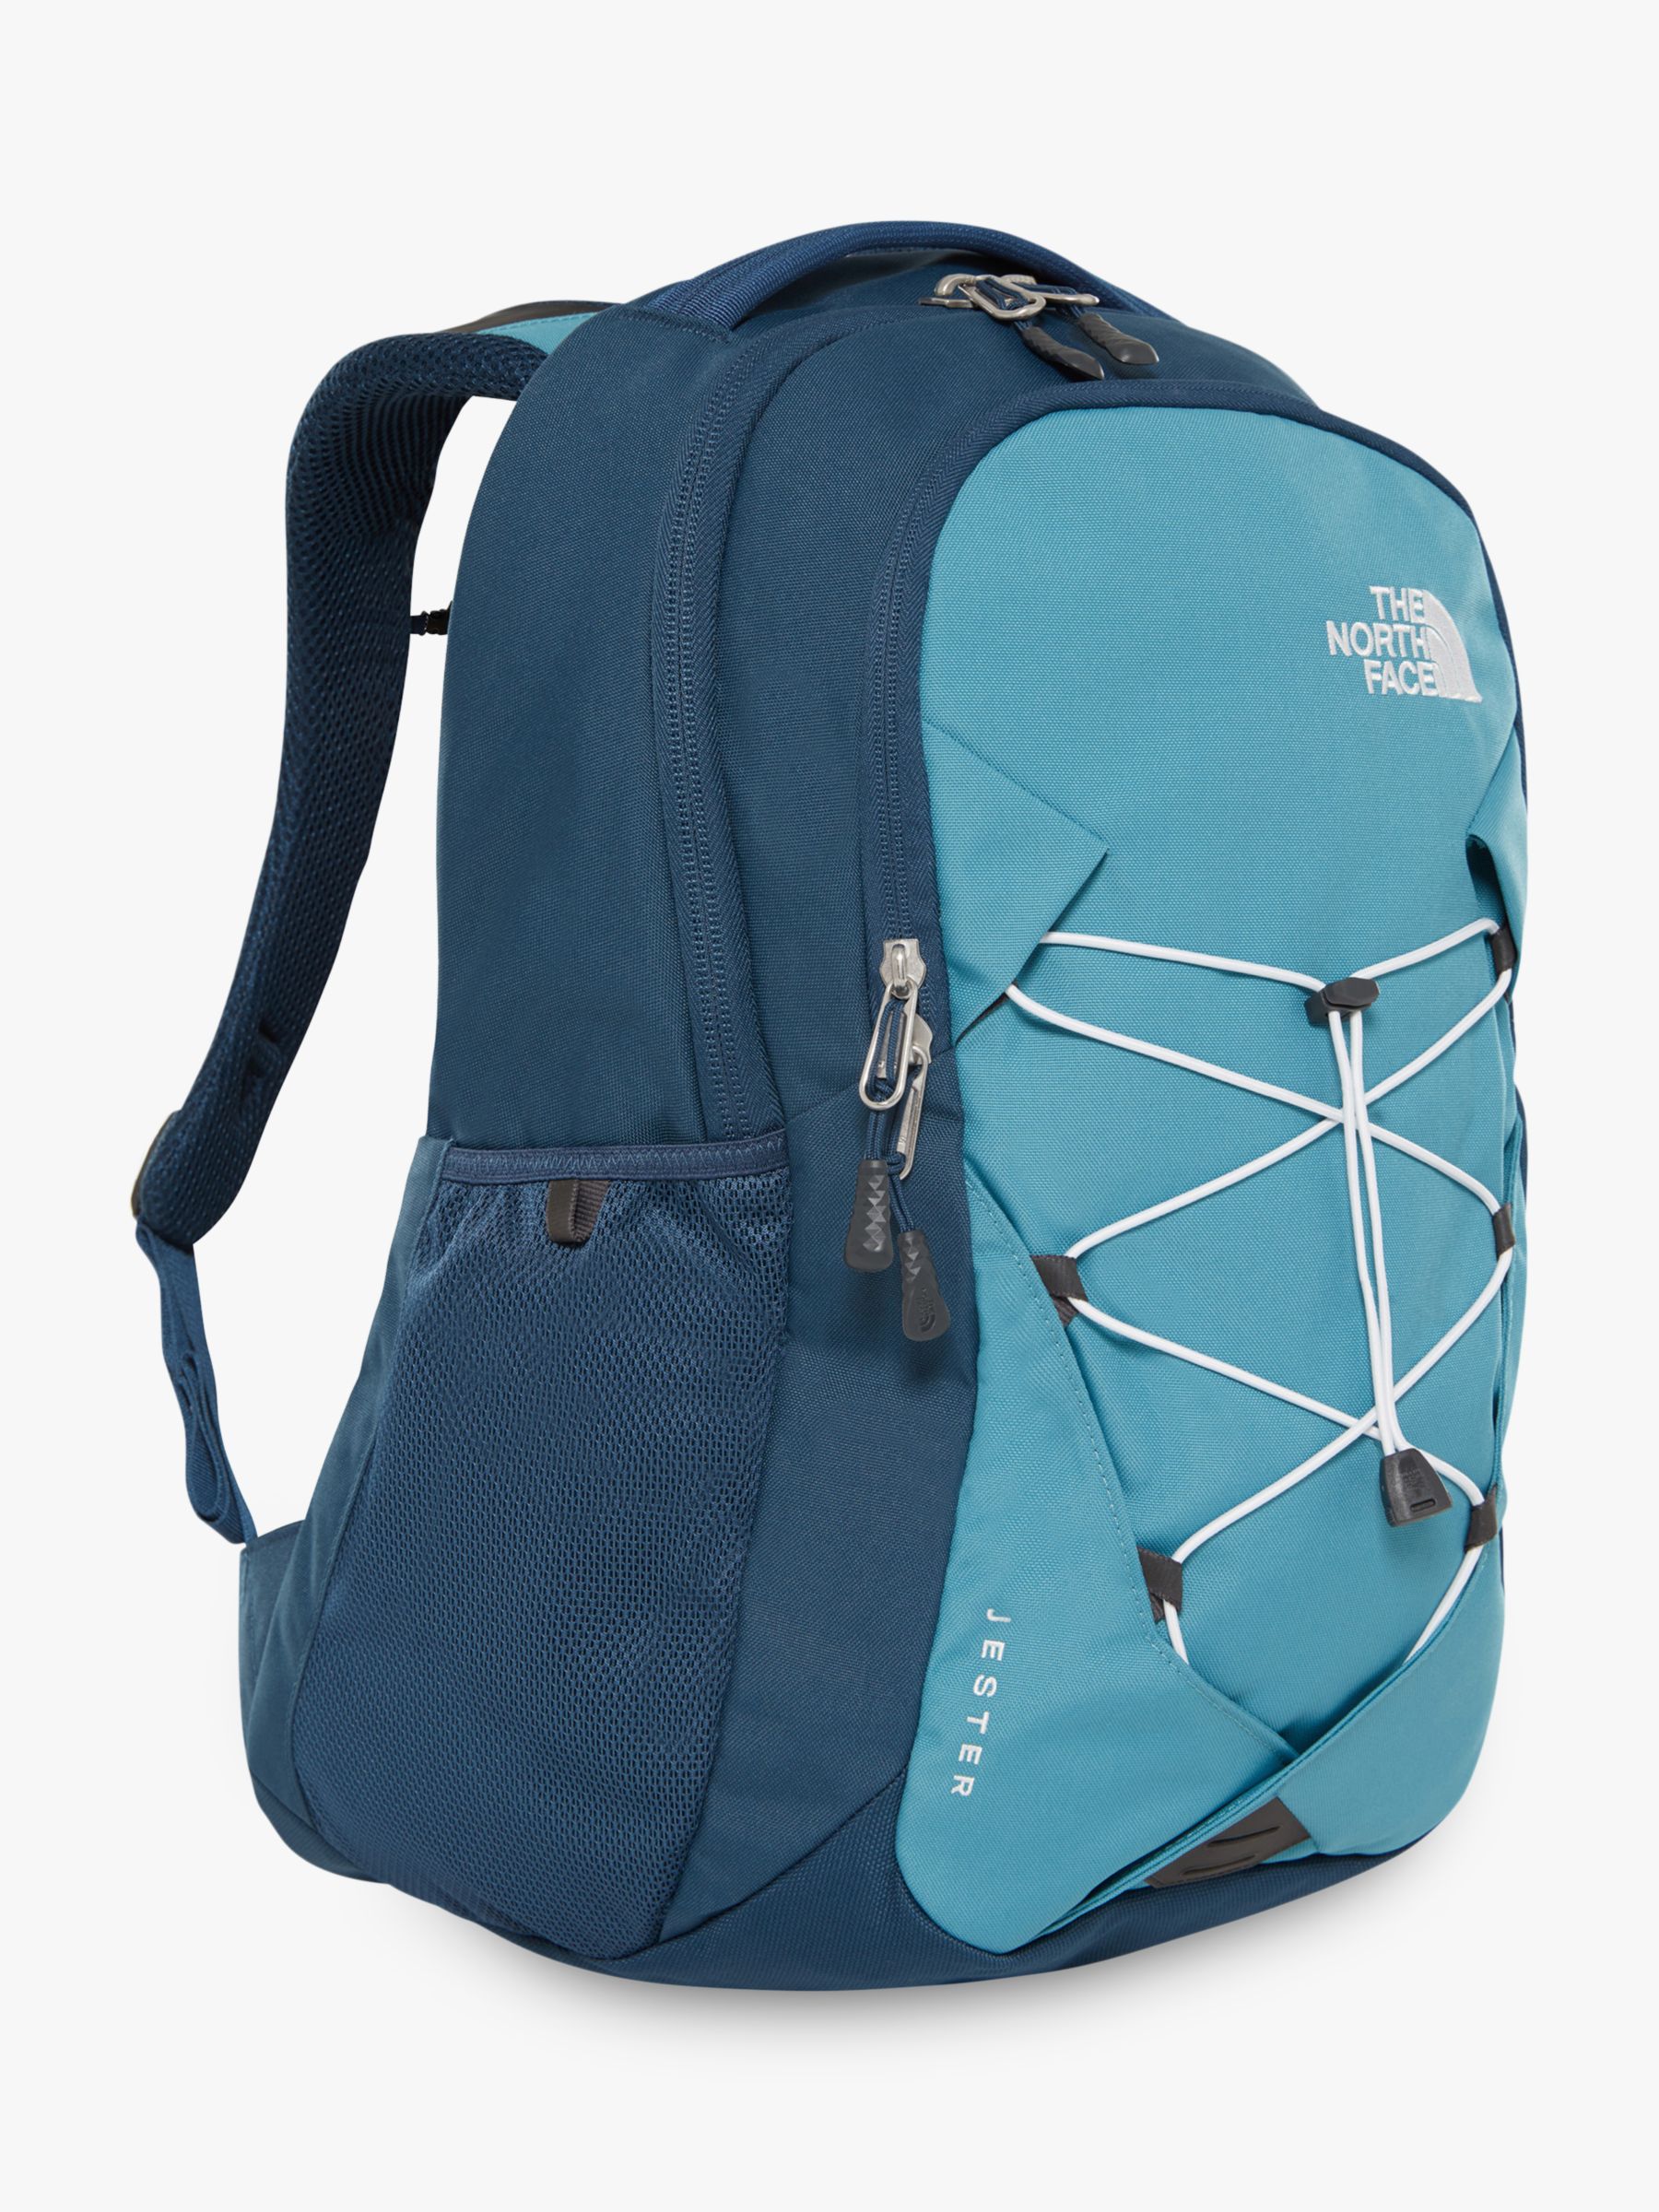 north face backpack teal